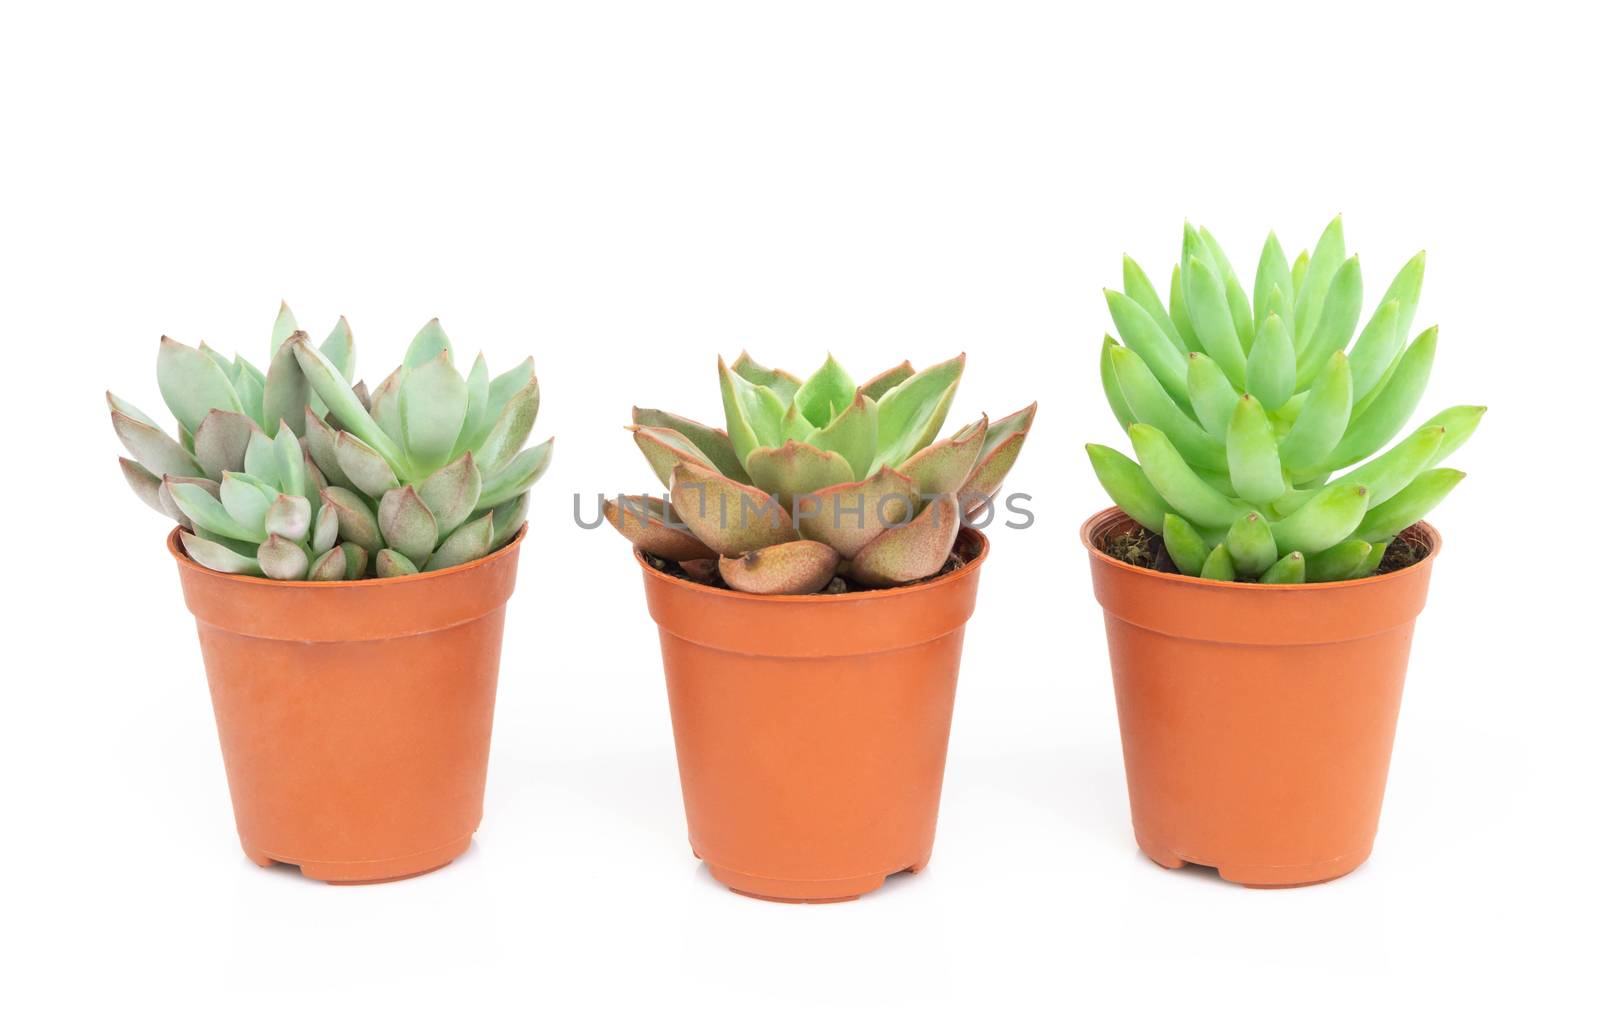 Green succulent cactus in pot isolate on white background, decor by pt.pongsak@gmail.com